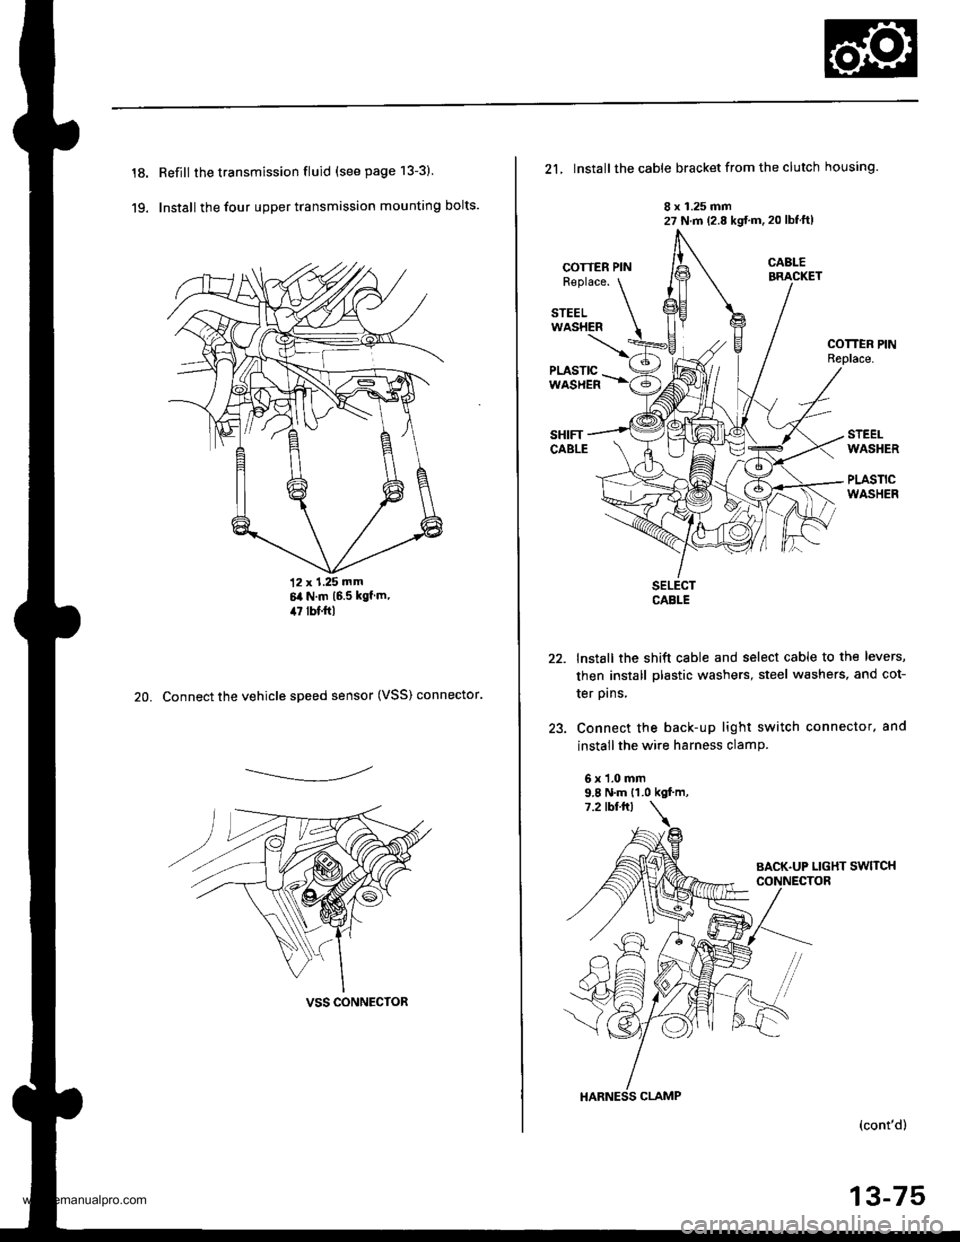 HONDA CR-V 1998 RD1-RD3 / 1.G Workshop Manual 
18.
19.
Refill the transmission fluid (see page 13-3)
Install the four upper transmission mounting bolts.
12 x 1.25 mm6it N.m 16.5 kgf m,il7 lbf.ftl
20. Connect the vehicle speed sensor (VSS) connect